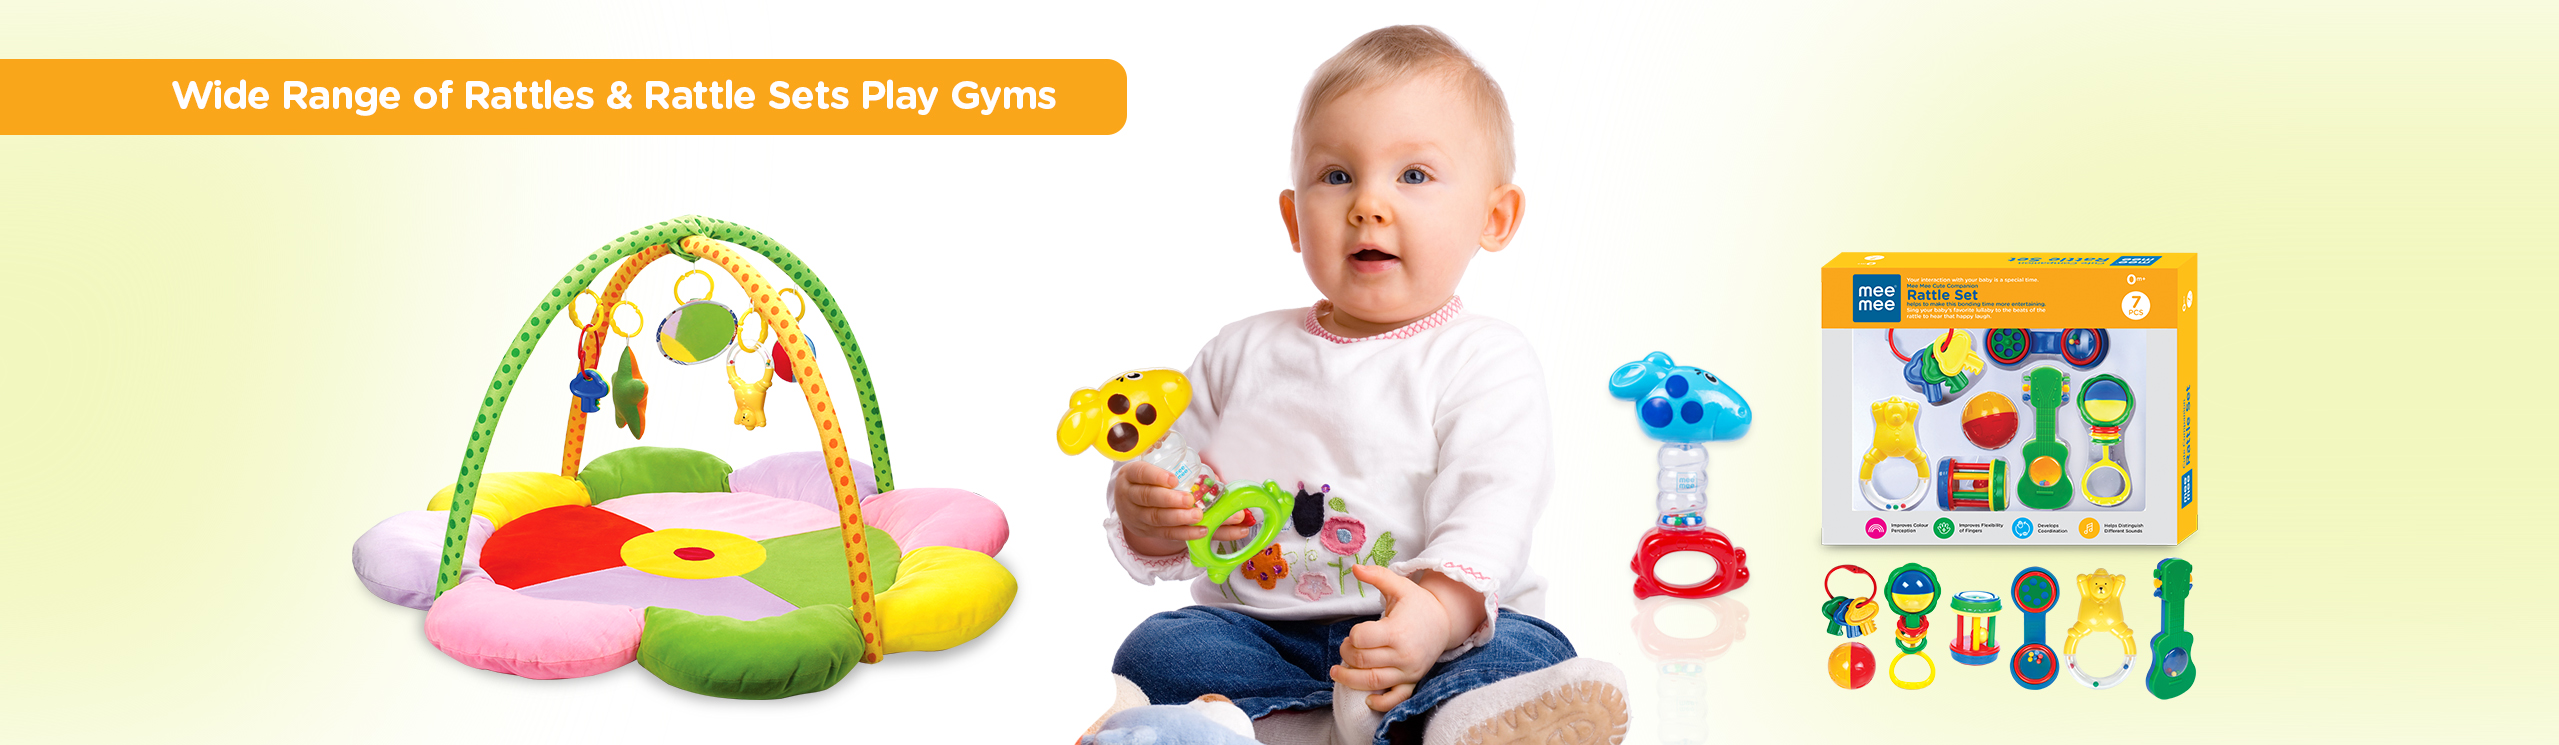 RATTLES & RATTLE SETS PLAY GYMS